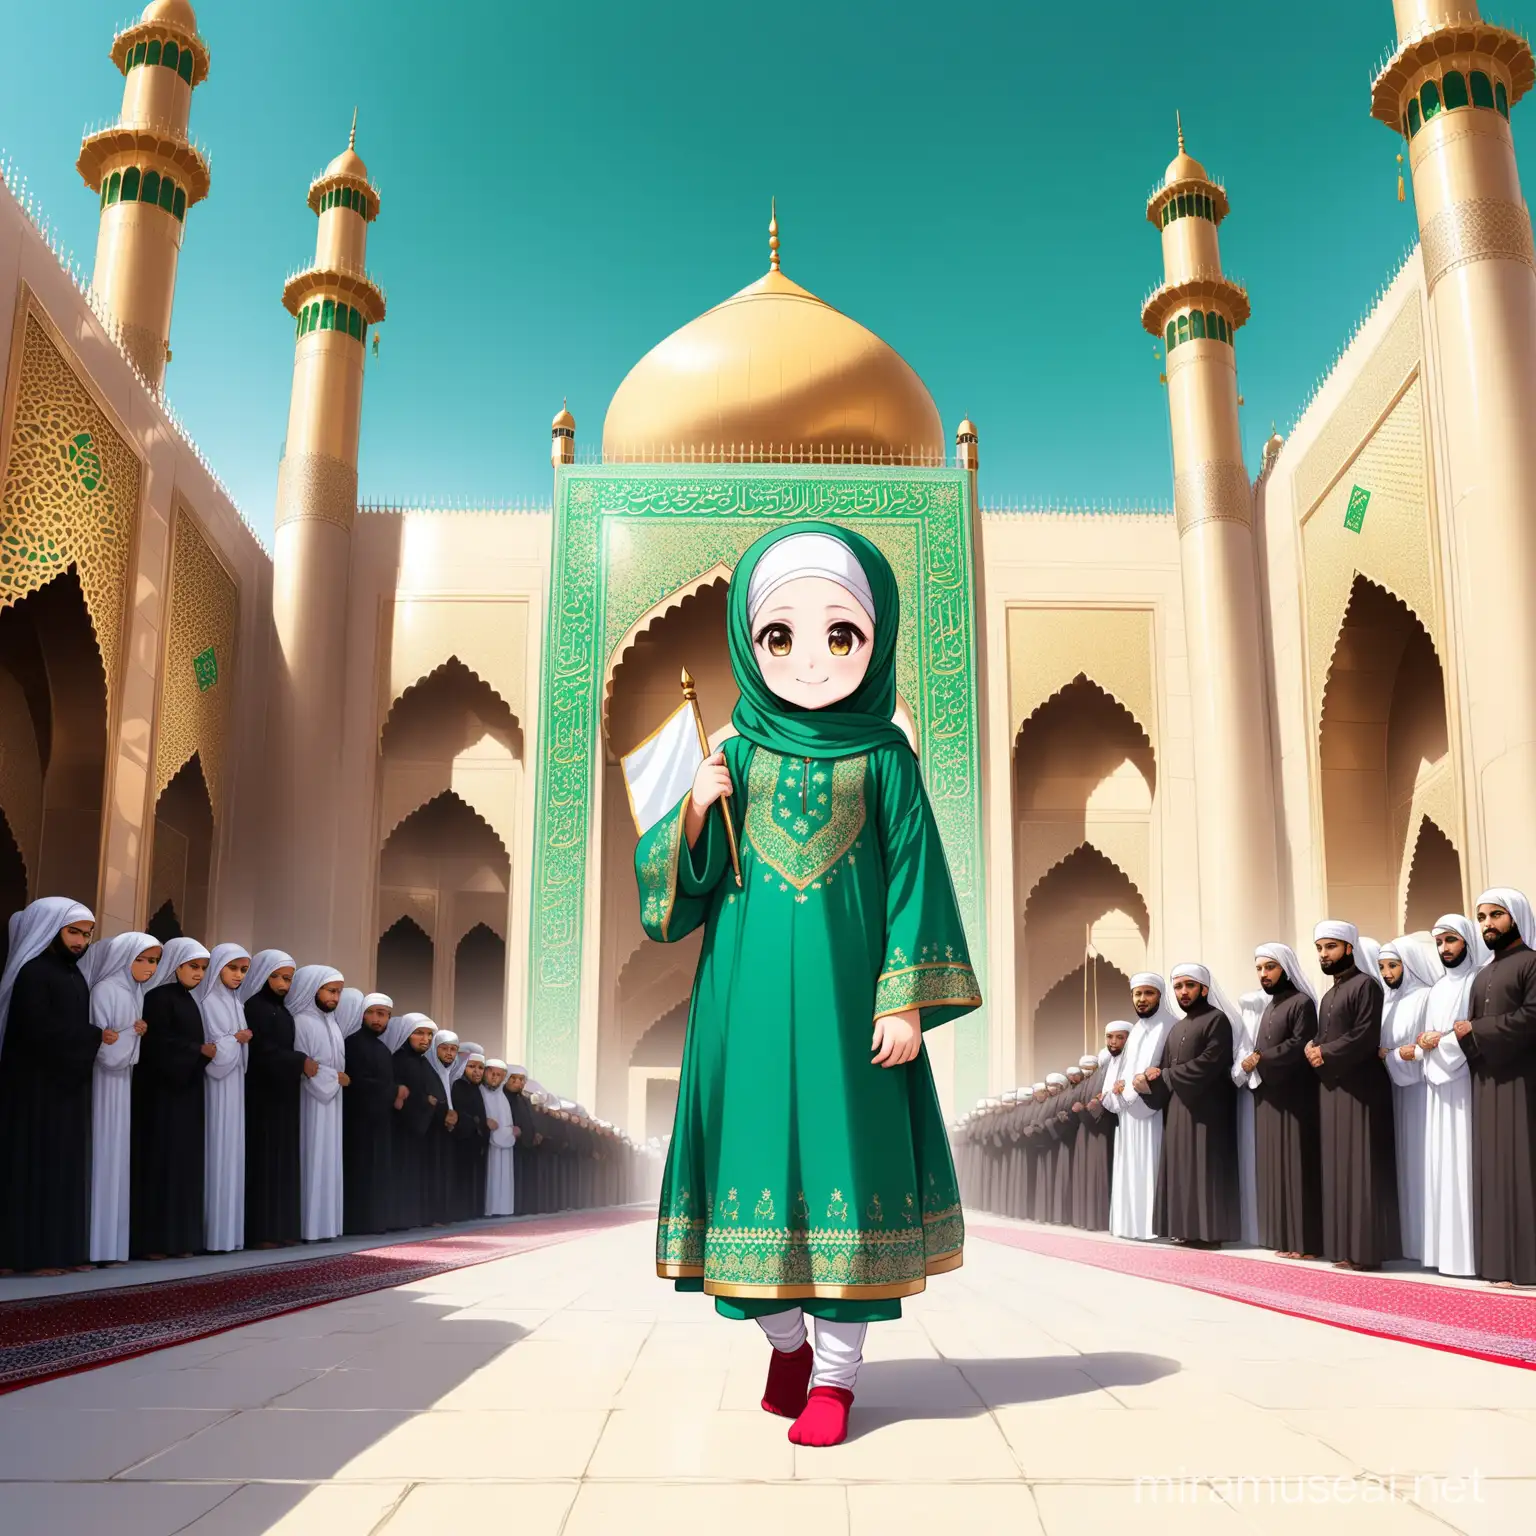 Character Persian little girl(full height,, white flag in hand proudly, Muslim, with emphasis no hair out of veil(Hijab), smaller eyes, bigger nose, white skin, cute, smiling, wearing socks, clothes full of Persian designs).

Atmosphere shrine of Imam Reza Yard.